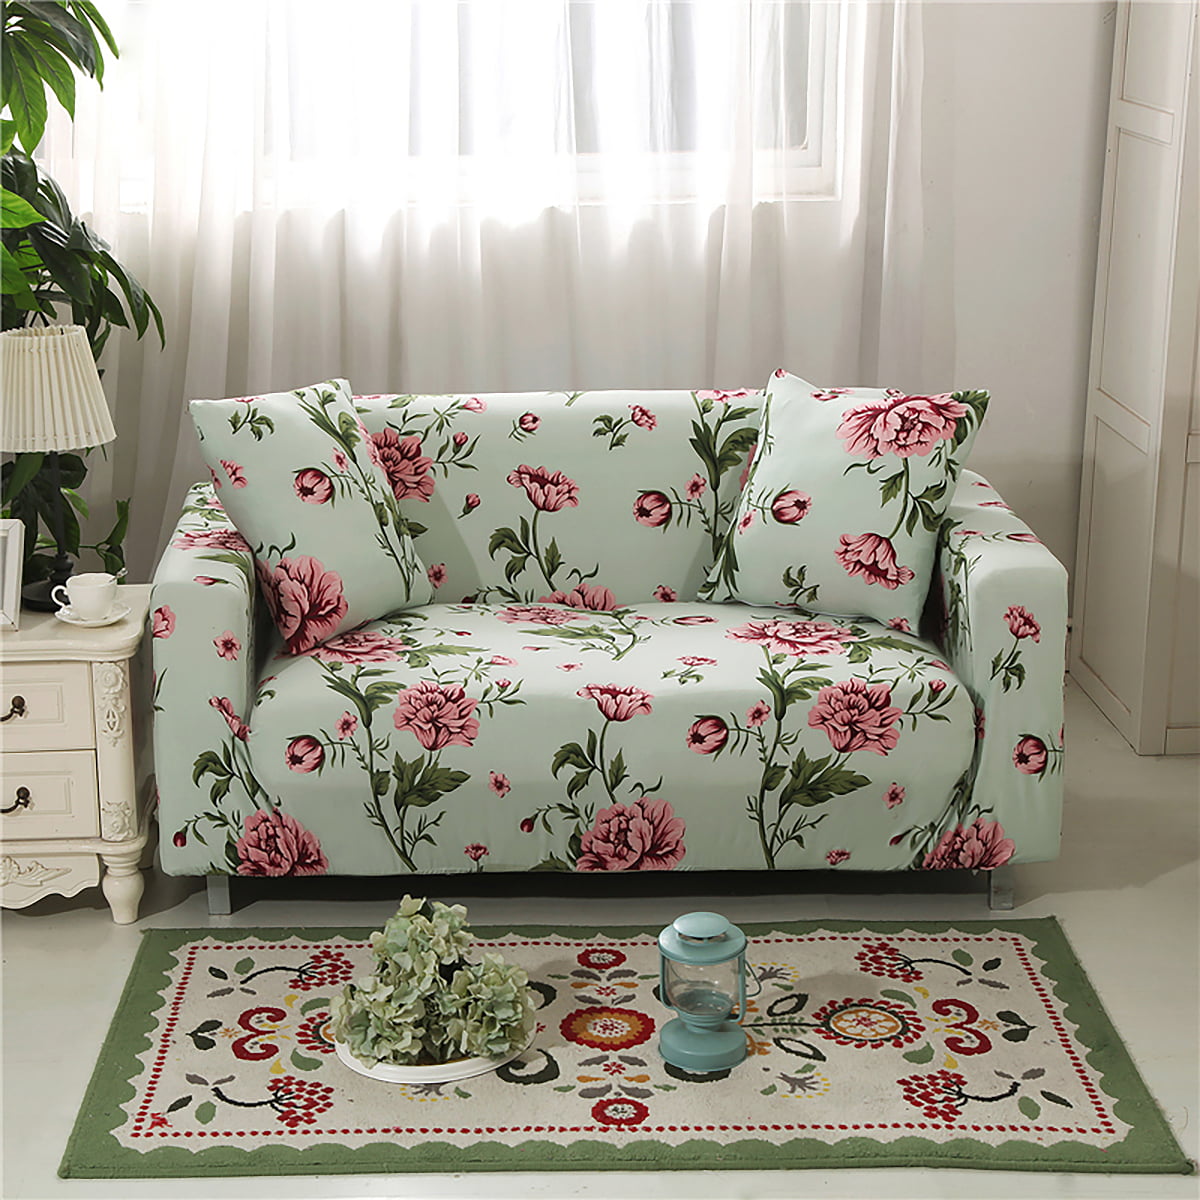 Details about   Floral Sofa Cover Sectional/Corner Slipcover Elastic Stretch Fit Fabric 1-4 Seat 